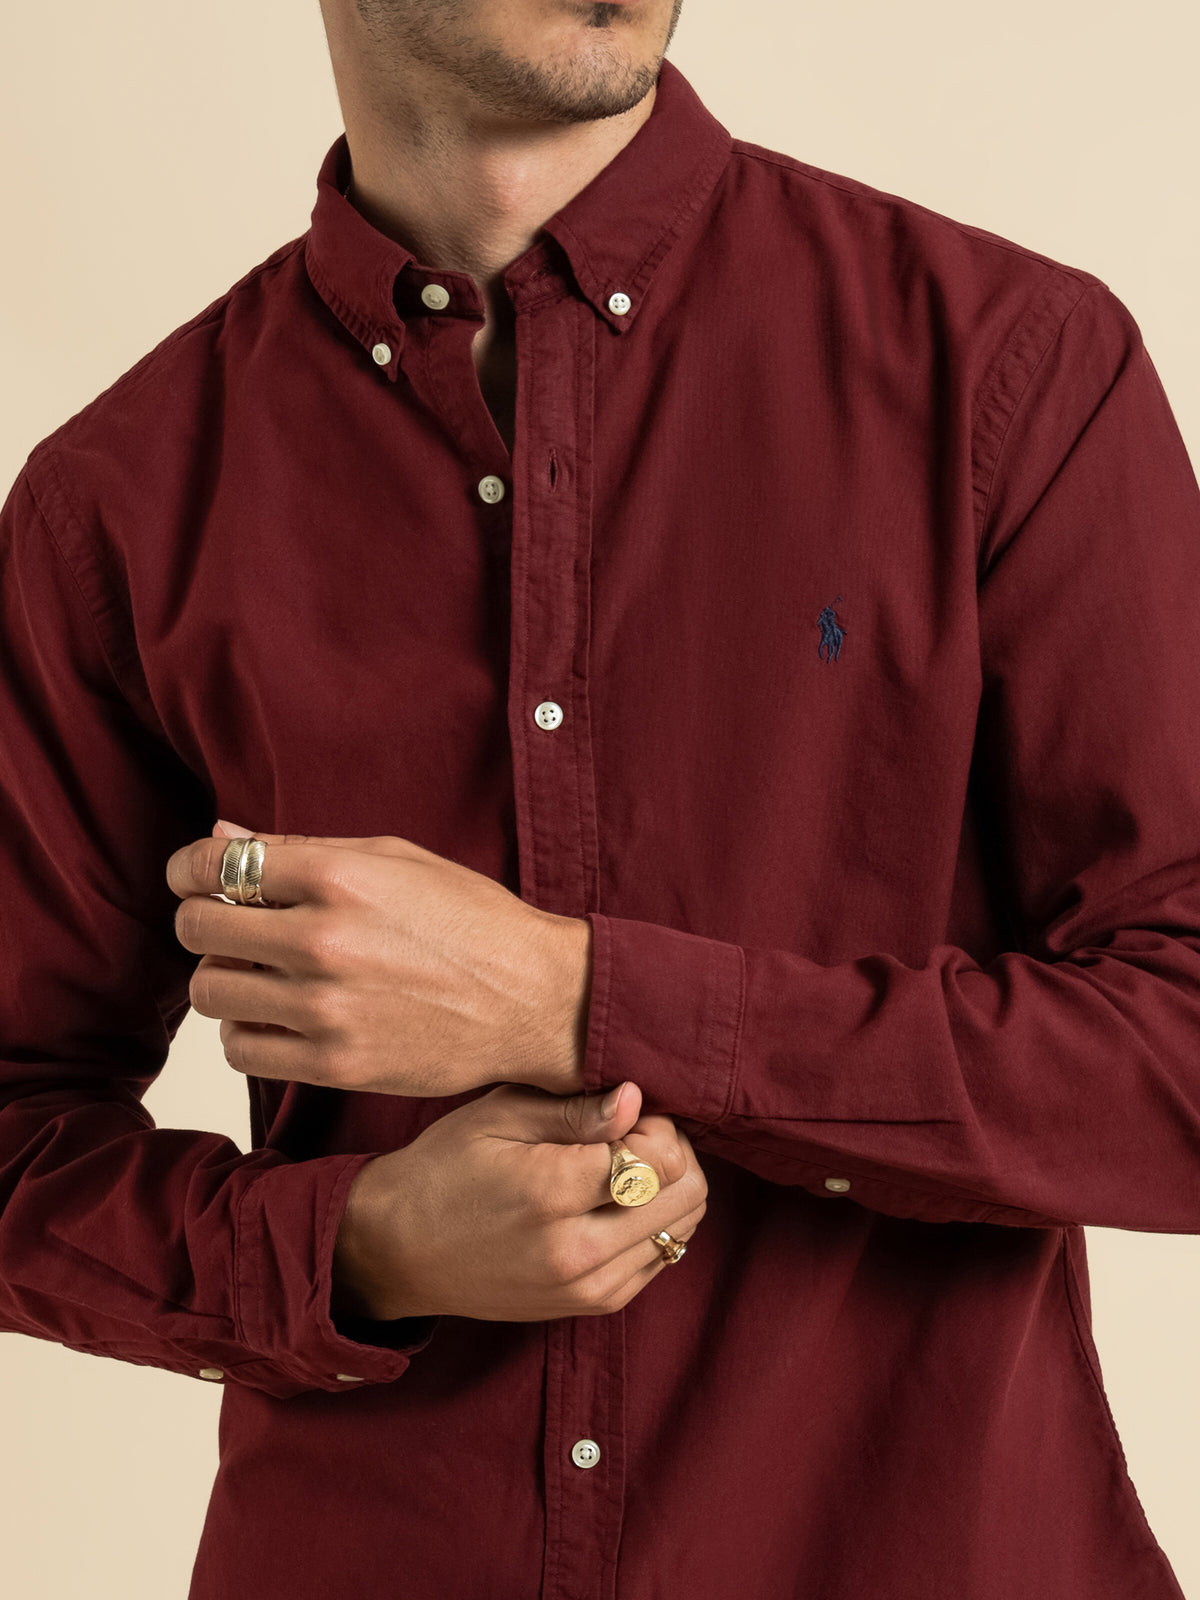 Slim Fit Button Up Shirt in Wine Red